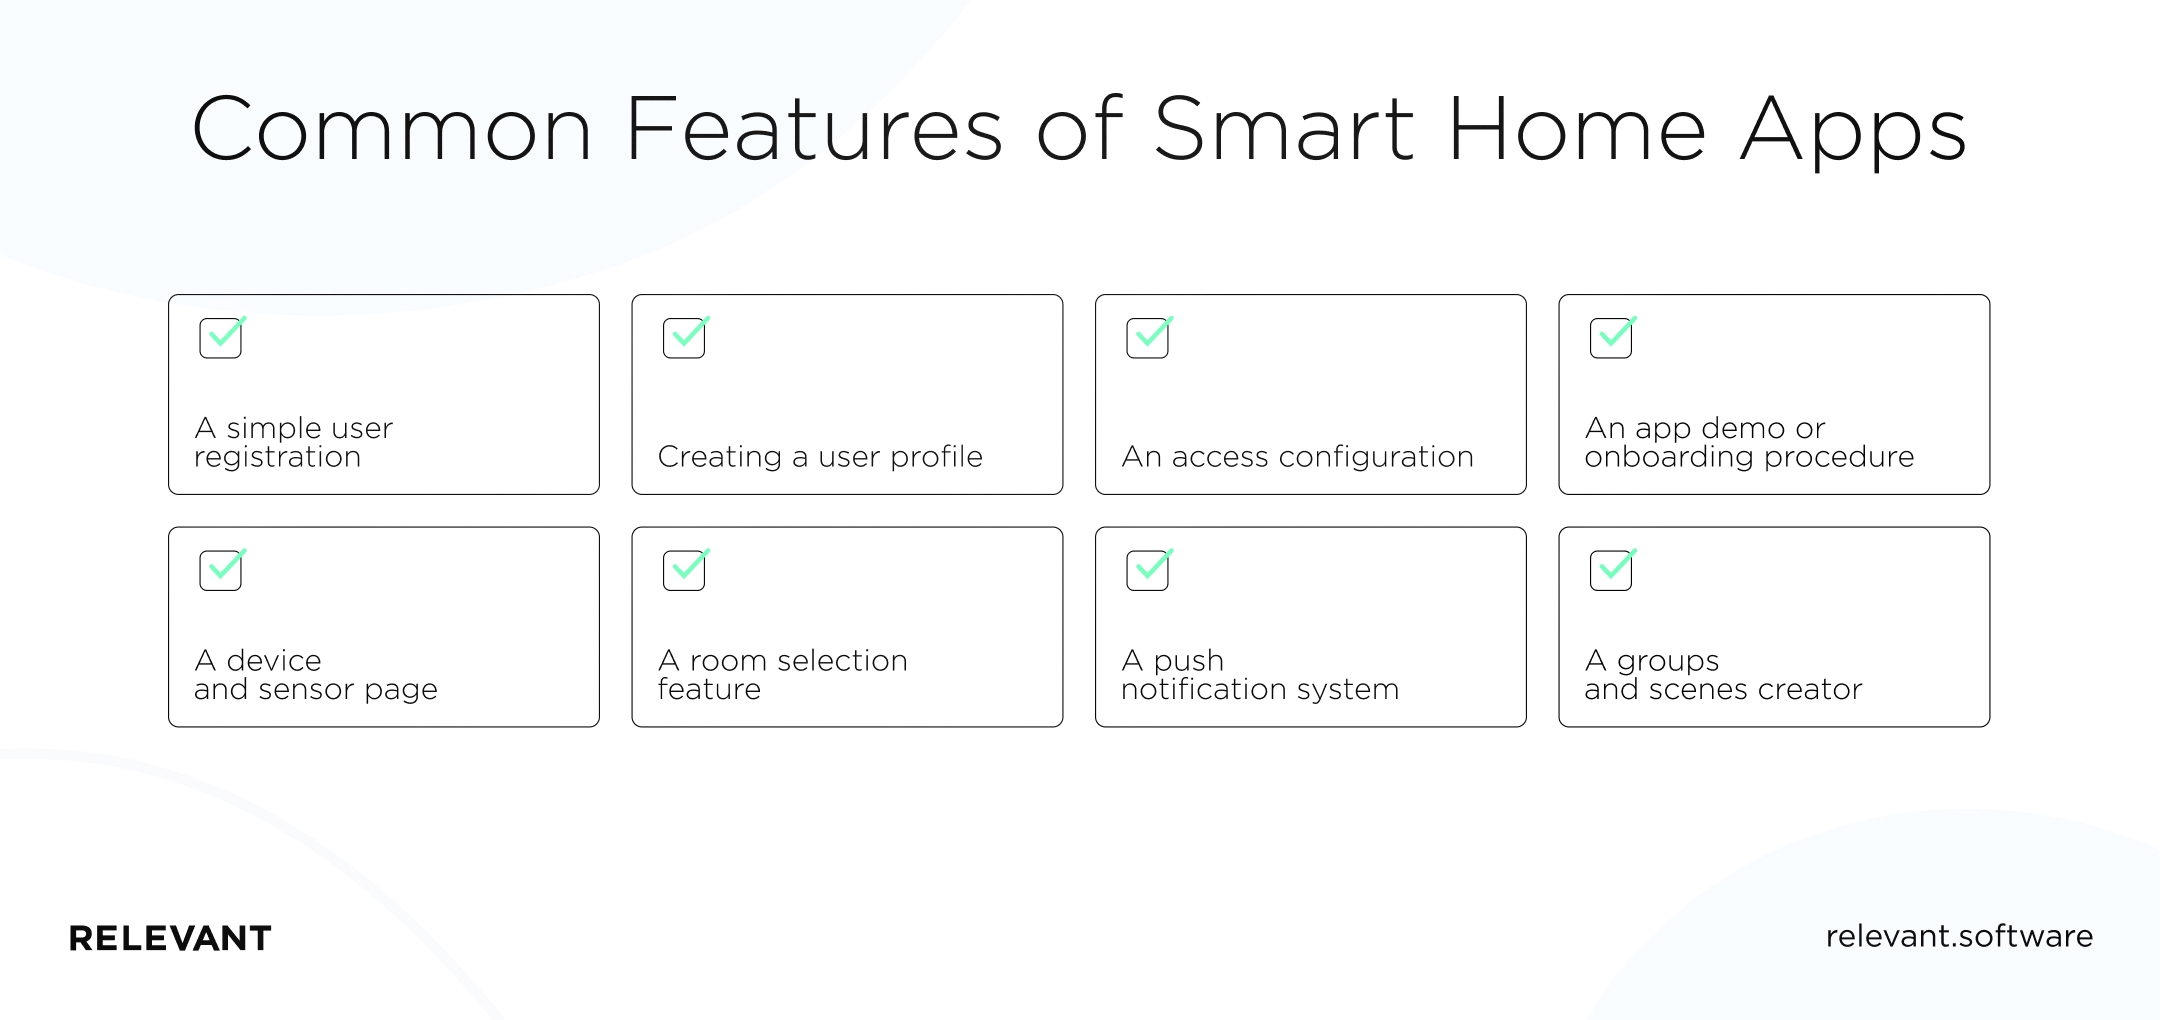 Common Features of Smart Home Apps